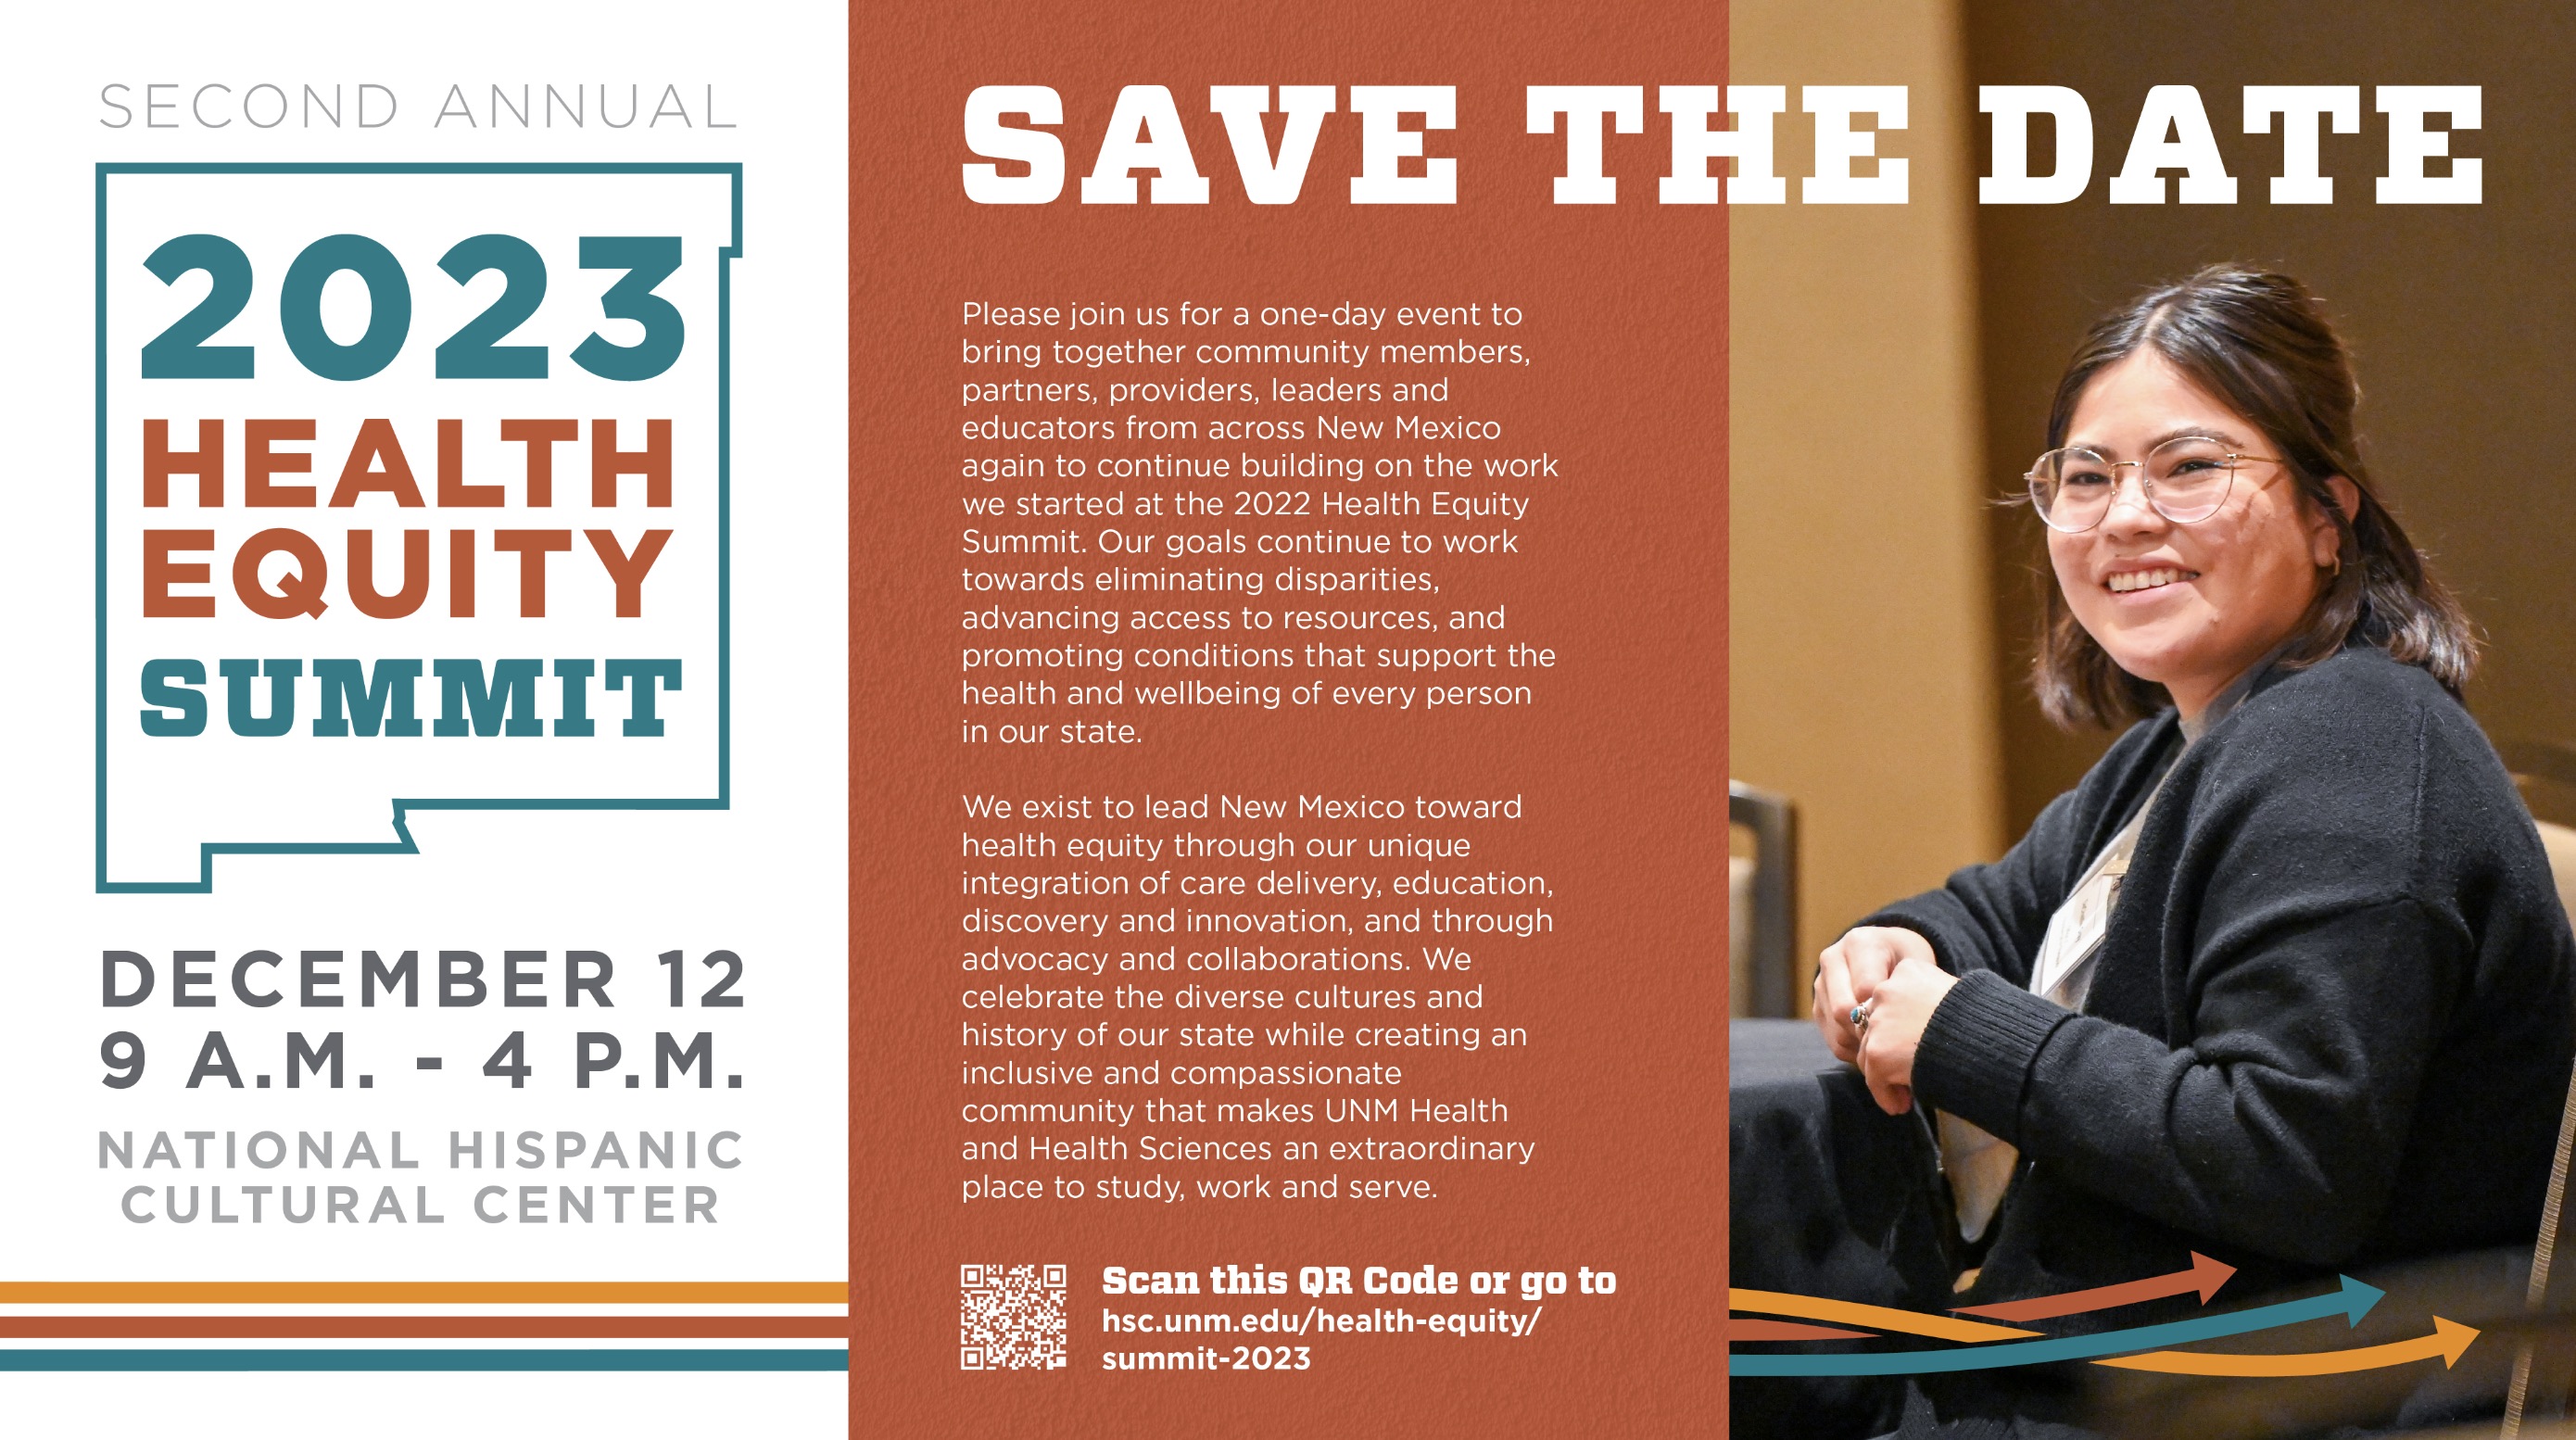 health equity summit save the date